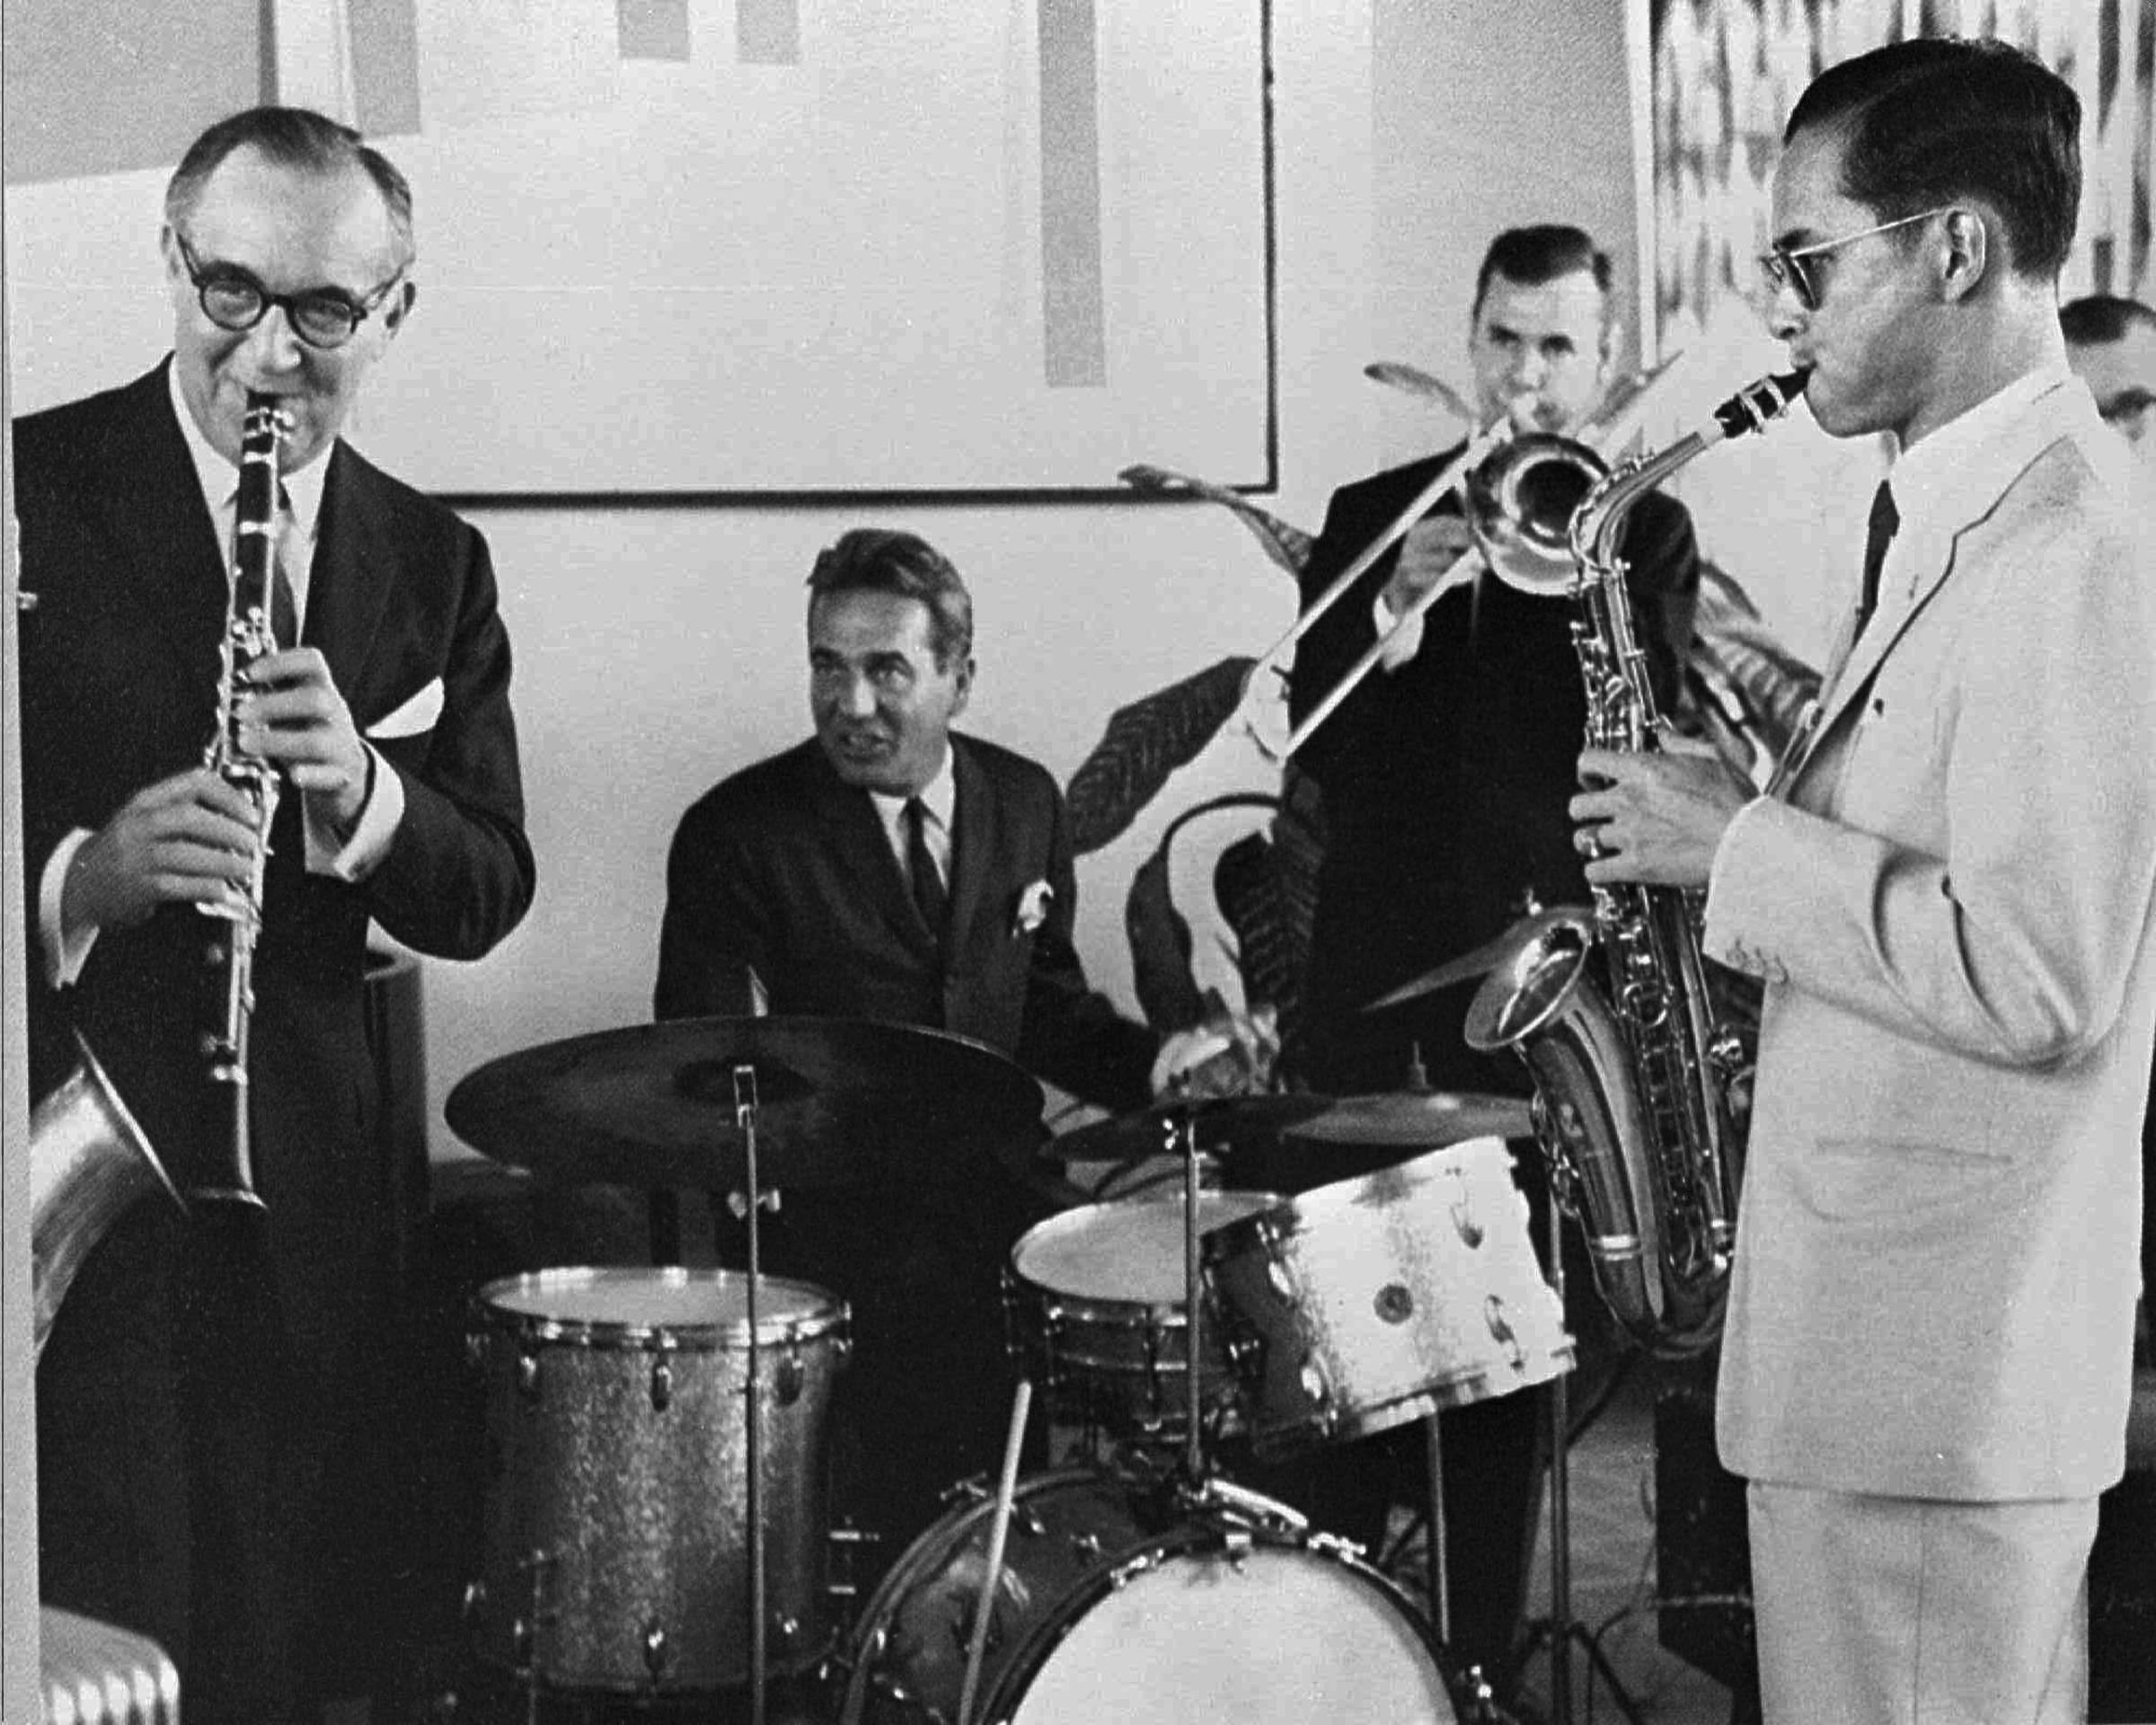 King Bhumibol Adulyadej (far right) plays the saxophone during a jam session with legendary jazz clarinetist Benny Goodman (far left) and his band in New York on July 5, 1960.